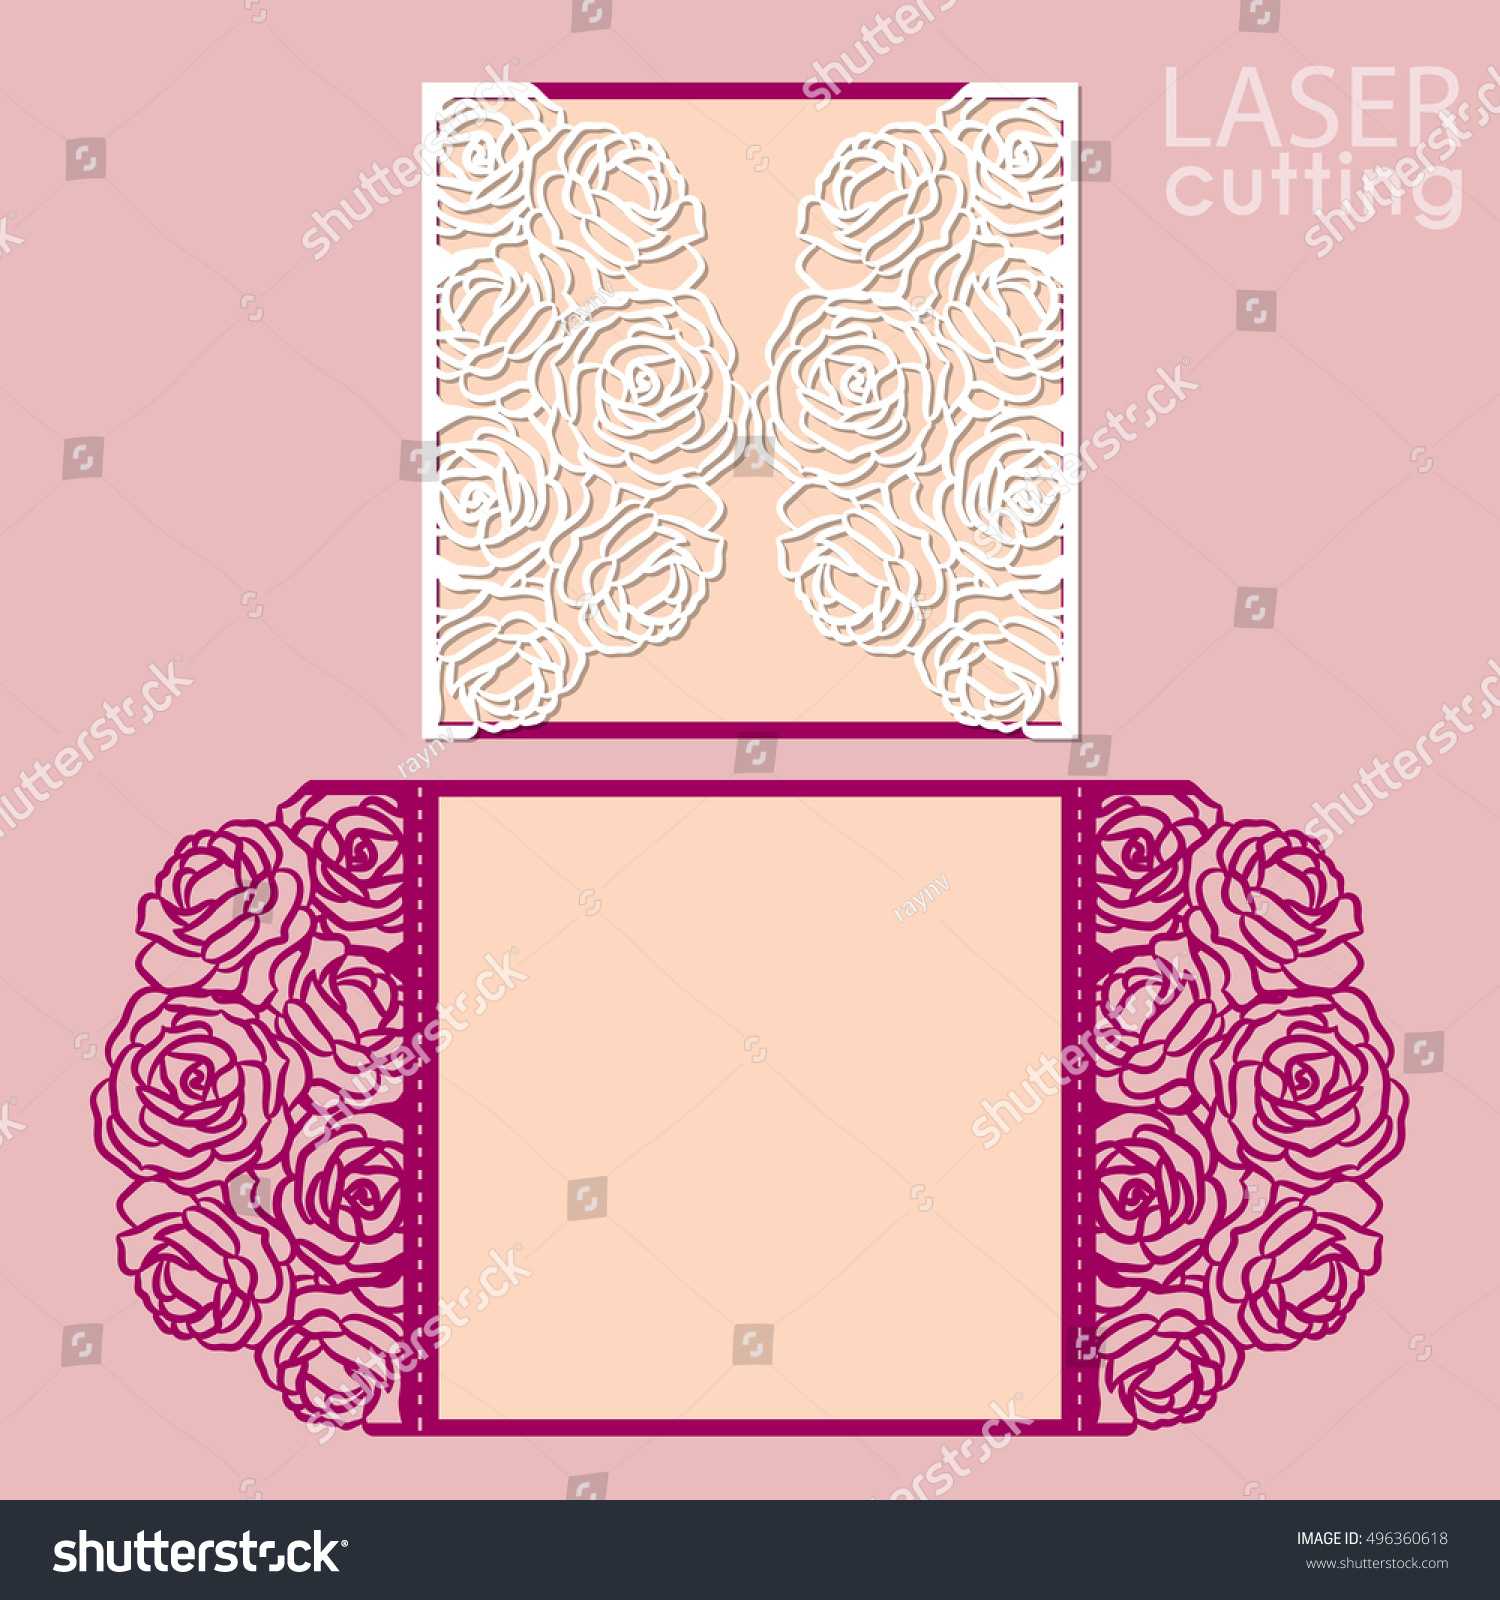 Laser Cut Wedding Invitation Card Template Stock Vector Throughout Fold Out Card Template